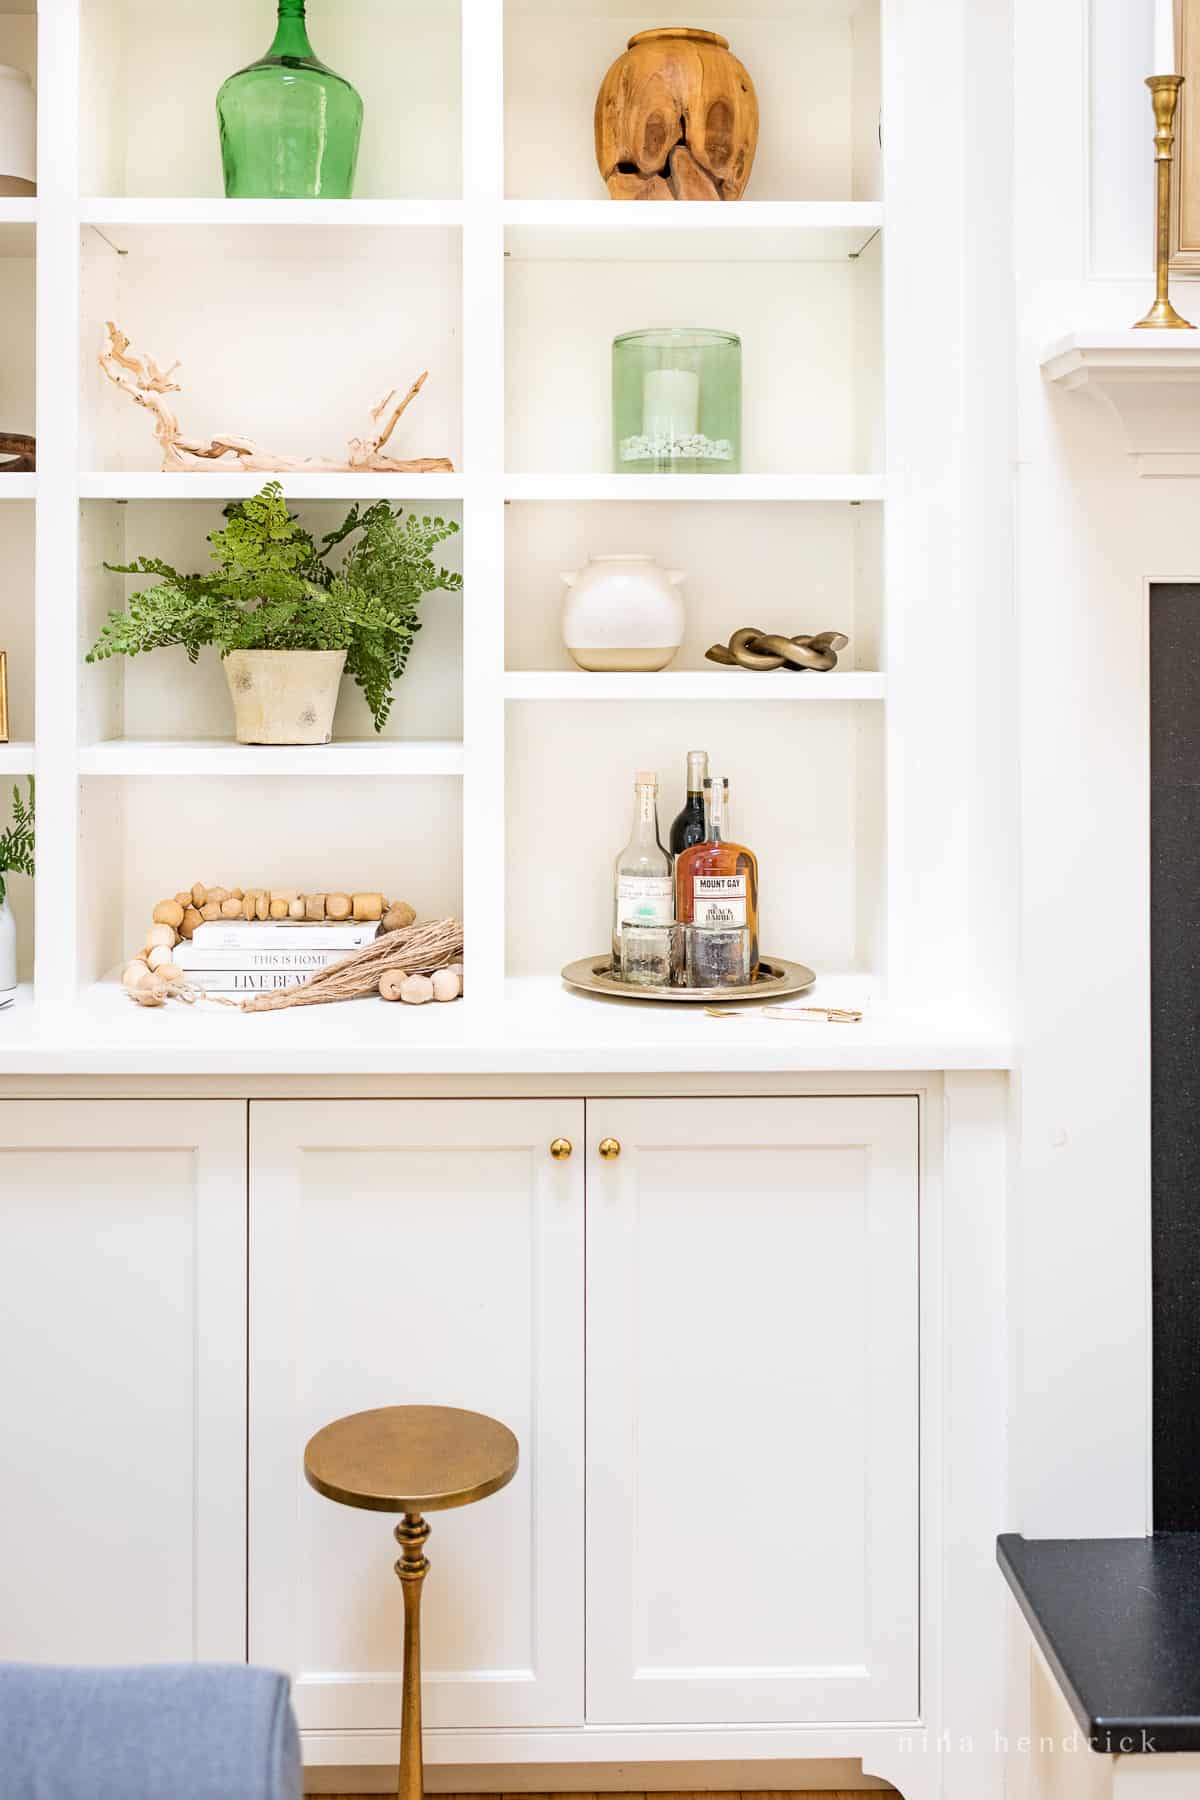 Built-in cabinets with a serving tray on the decorative shelf